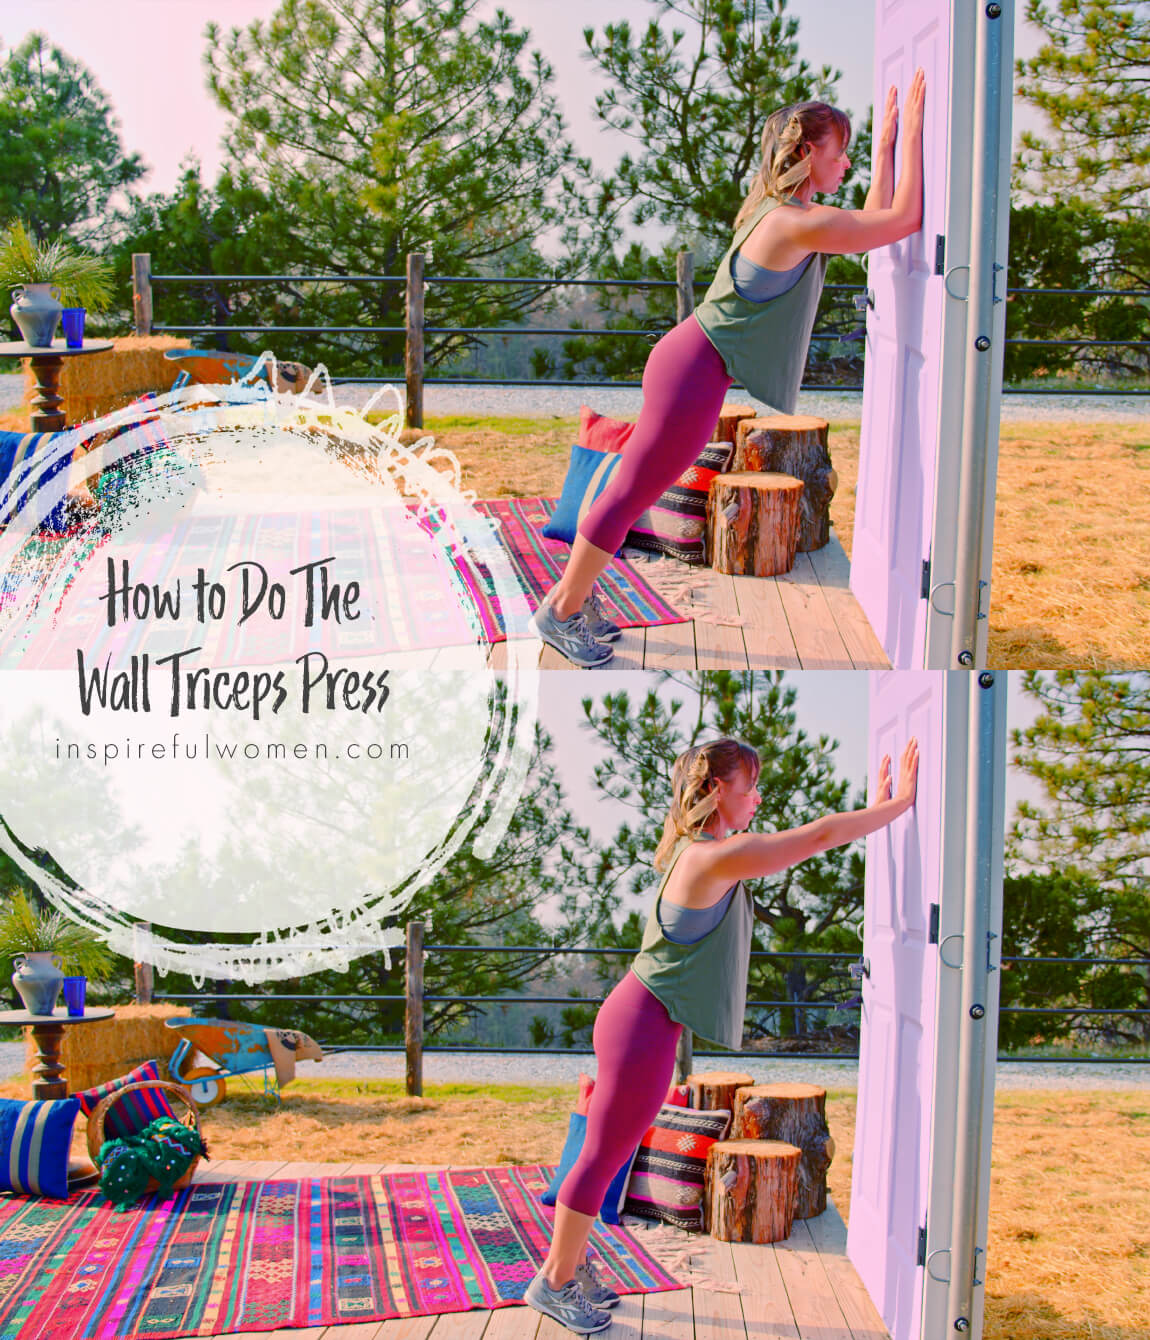 how-to-wall-triceps-press-extension-bodyweight-arm-exercise-at-home-proper-form